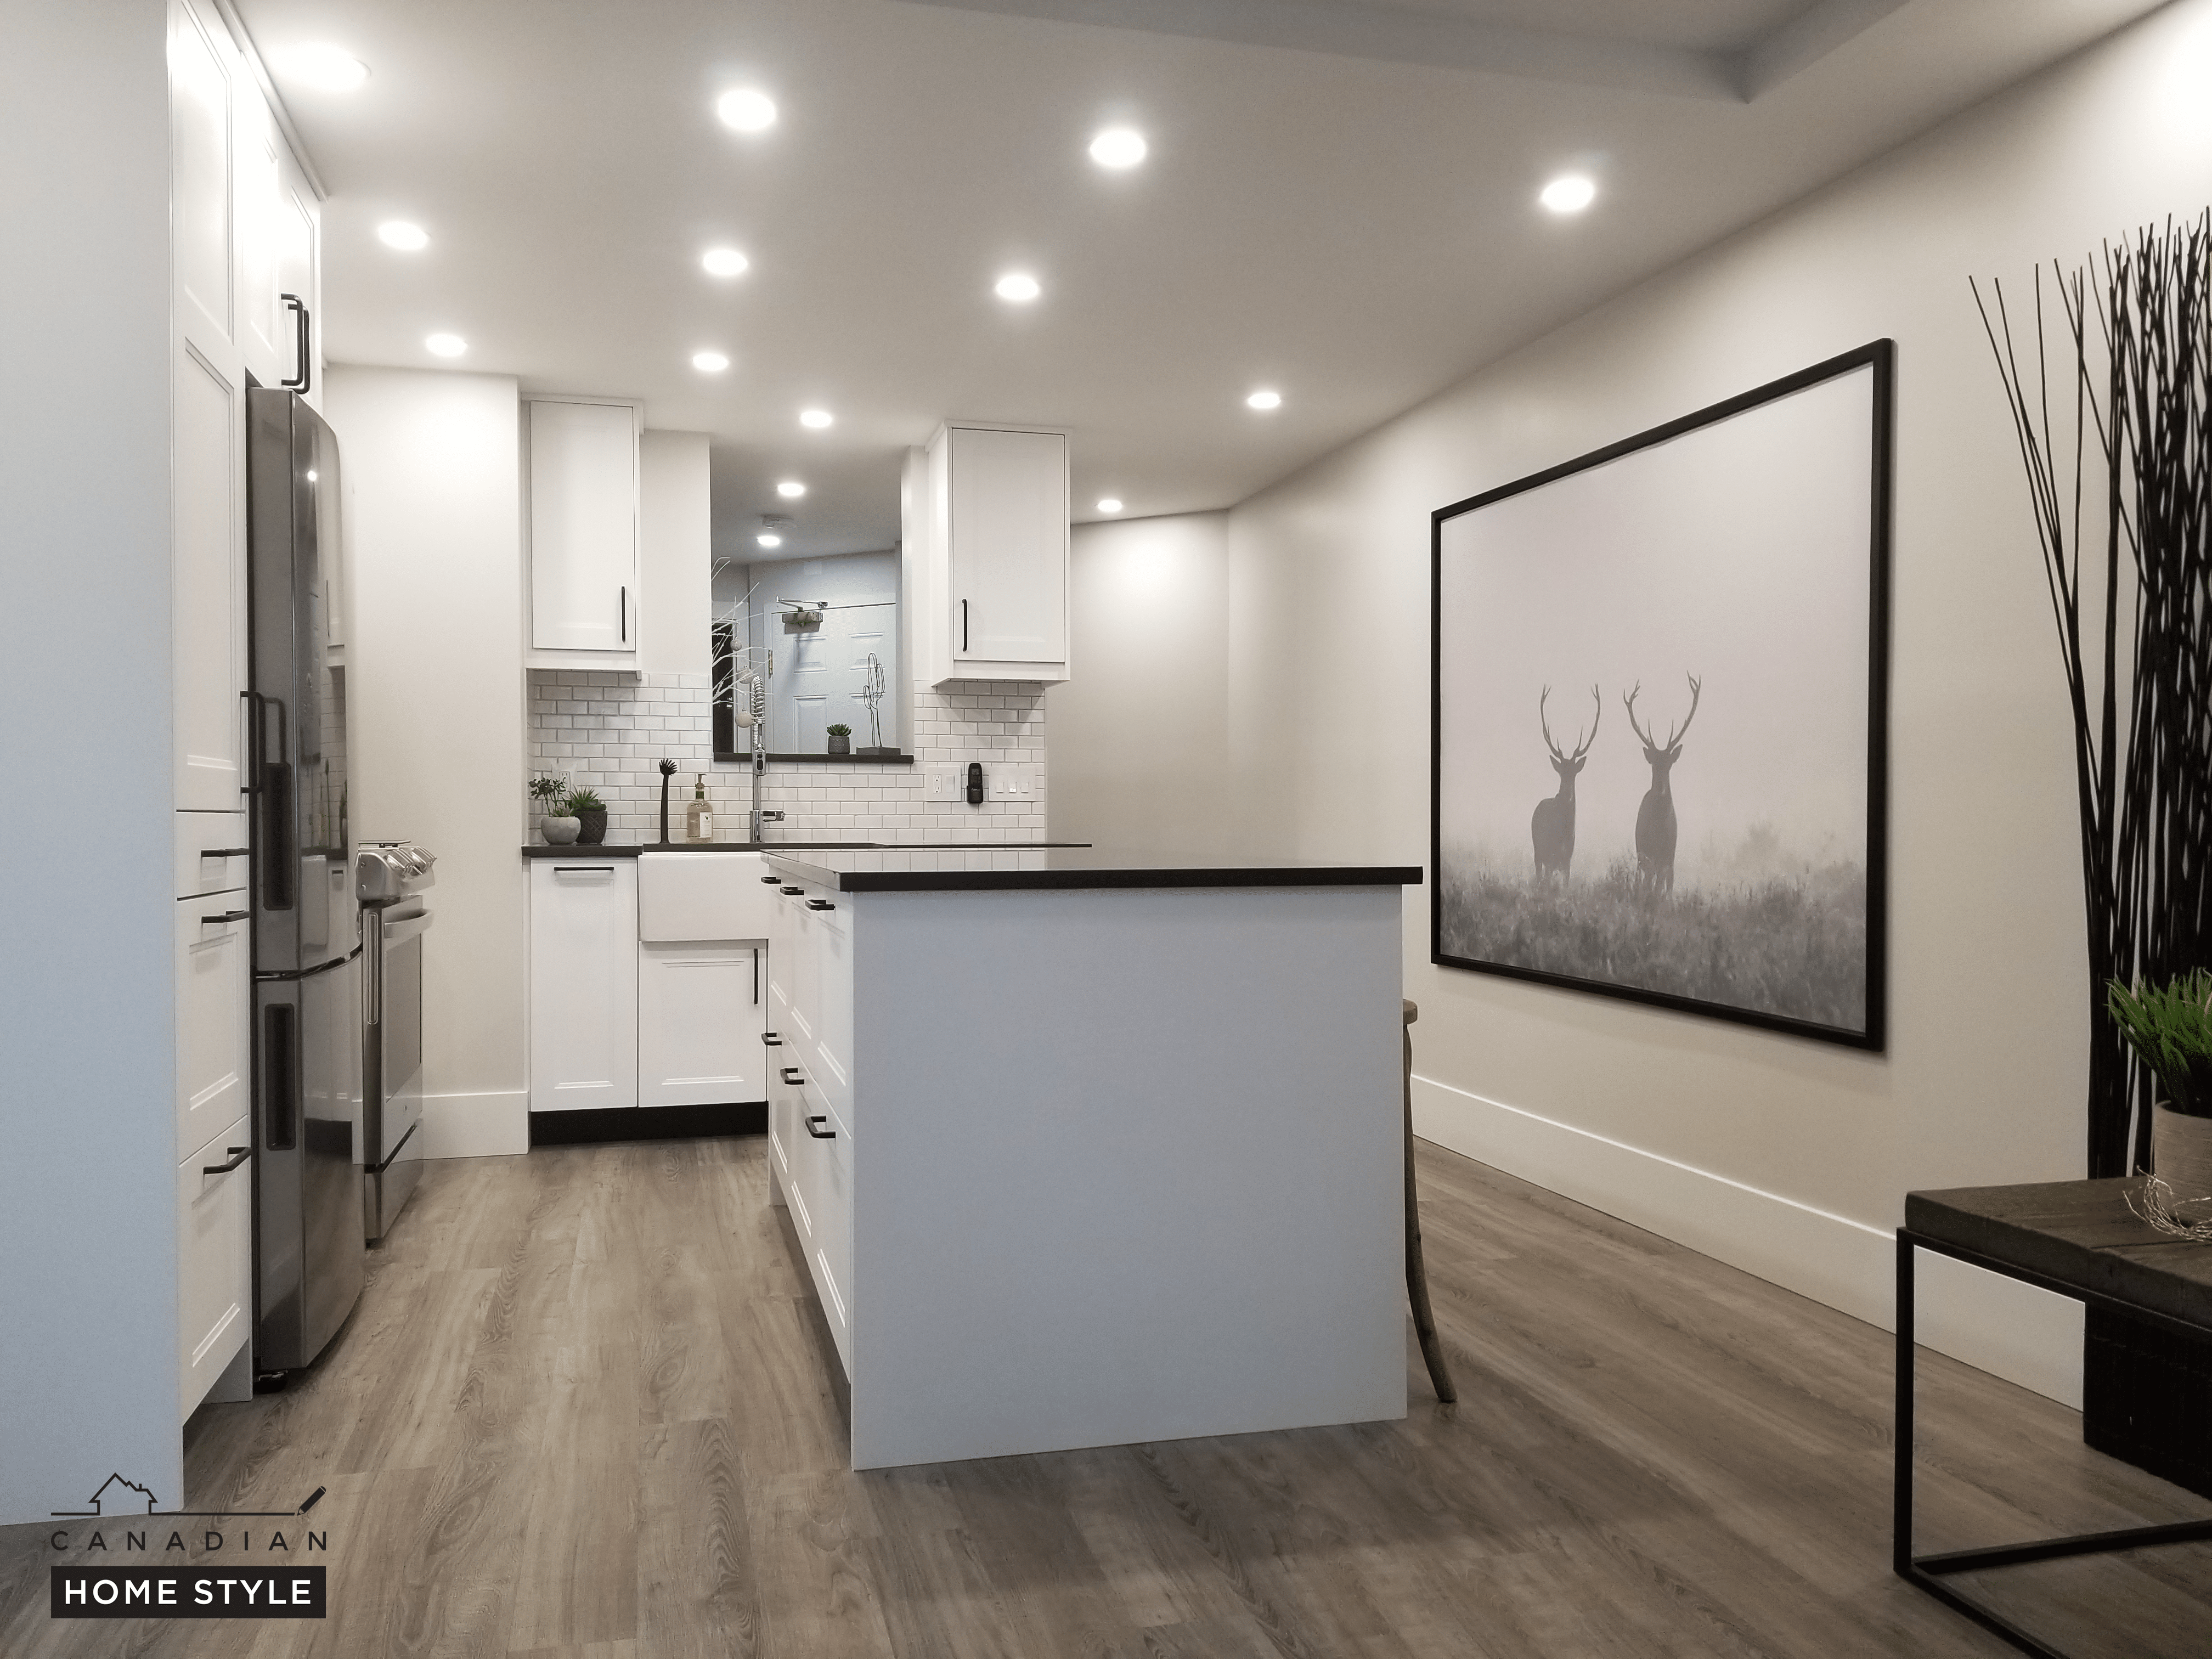 A rendering of a kitchen with white cabinets and wood flooring, featuring vinyl flooring.